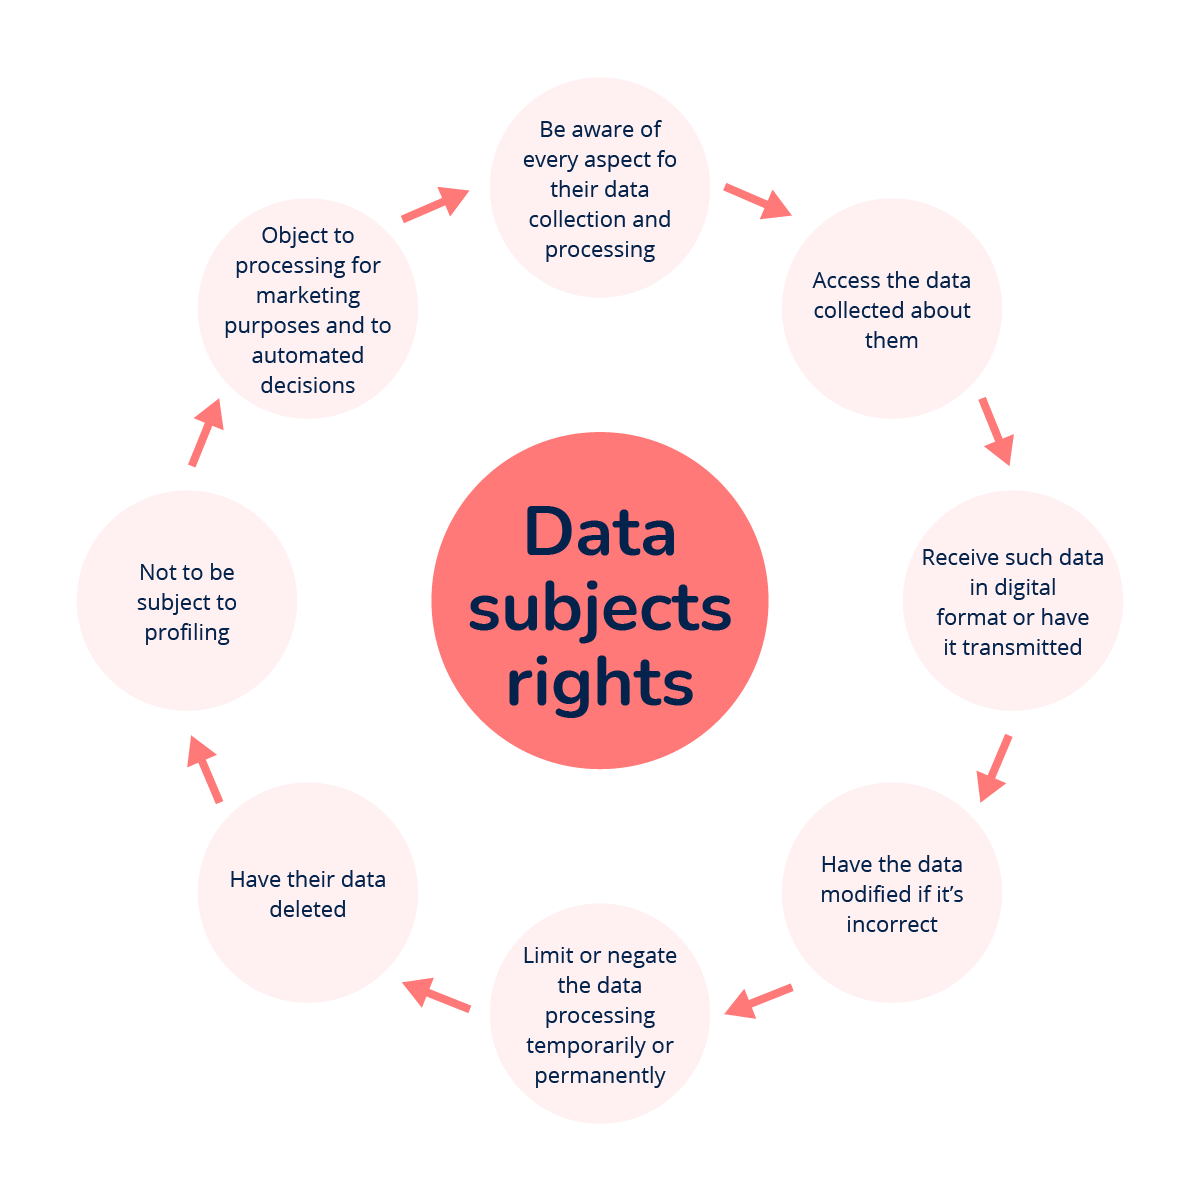 GDPR data subjects rights